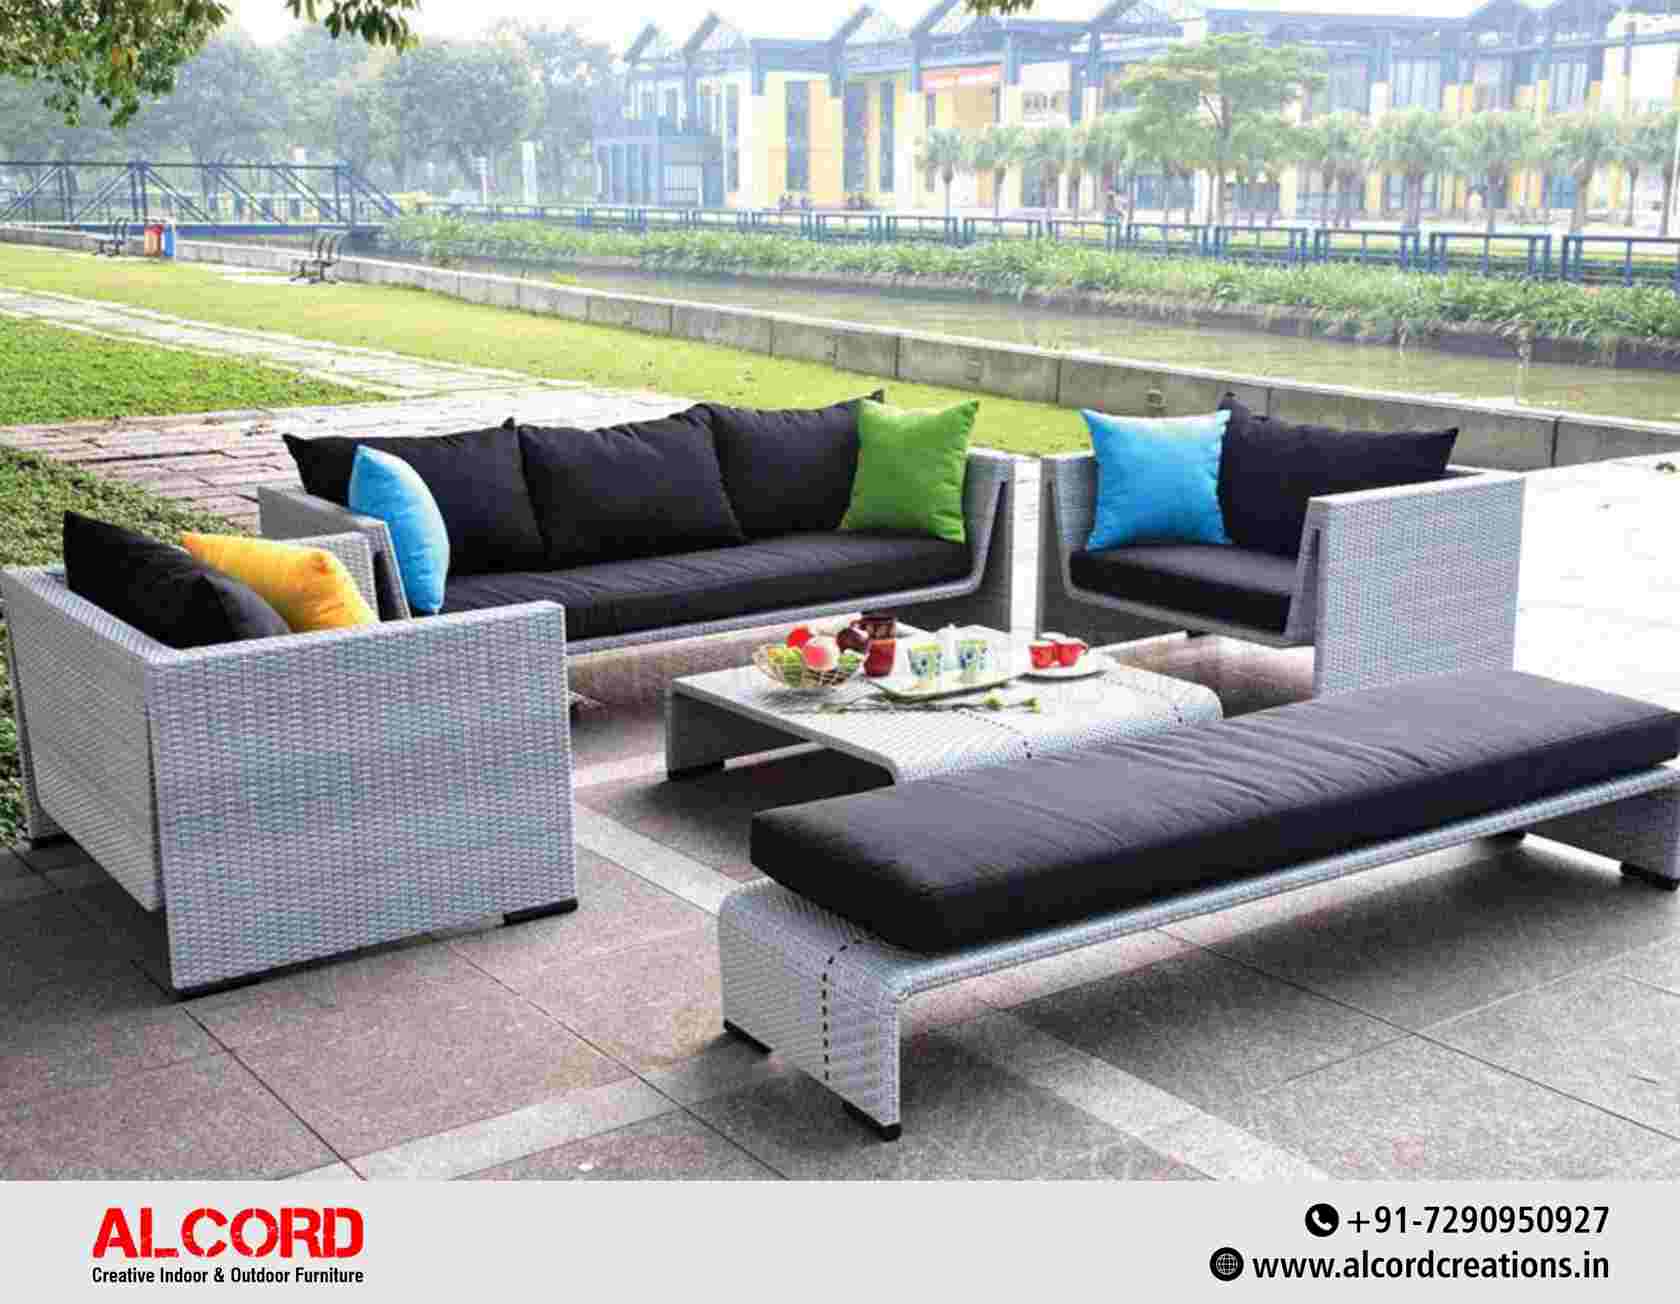 Improve Your Premises Overall Appearance with Alcord Creations Outdoor